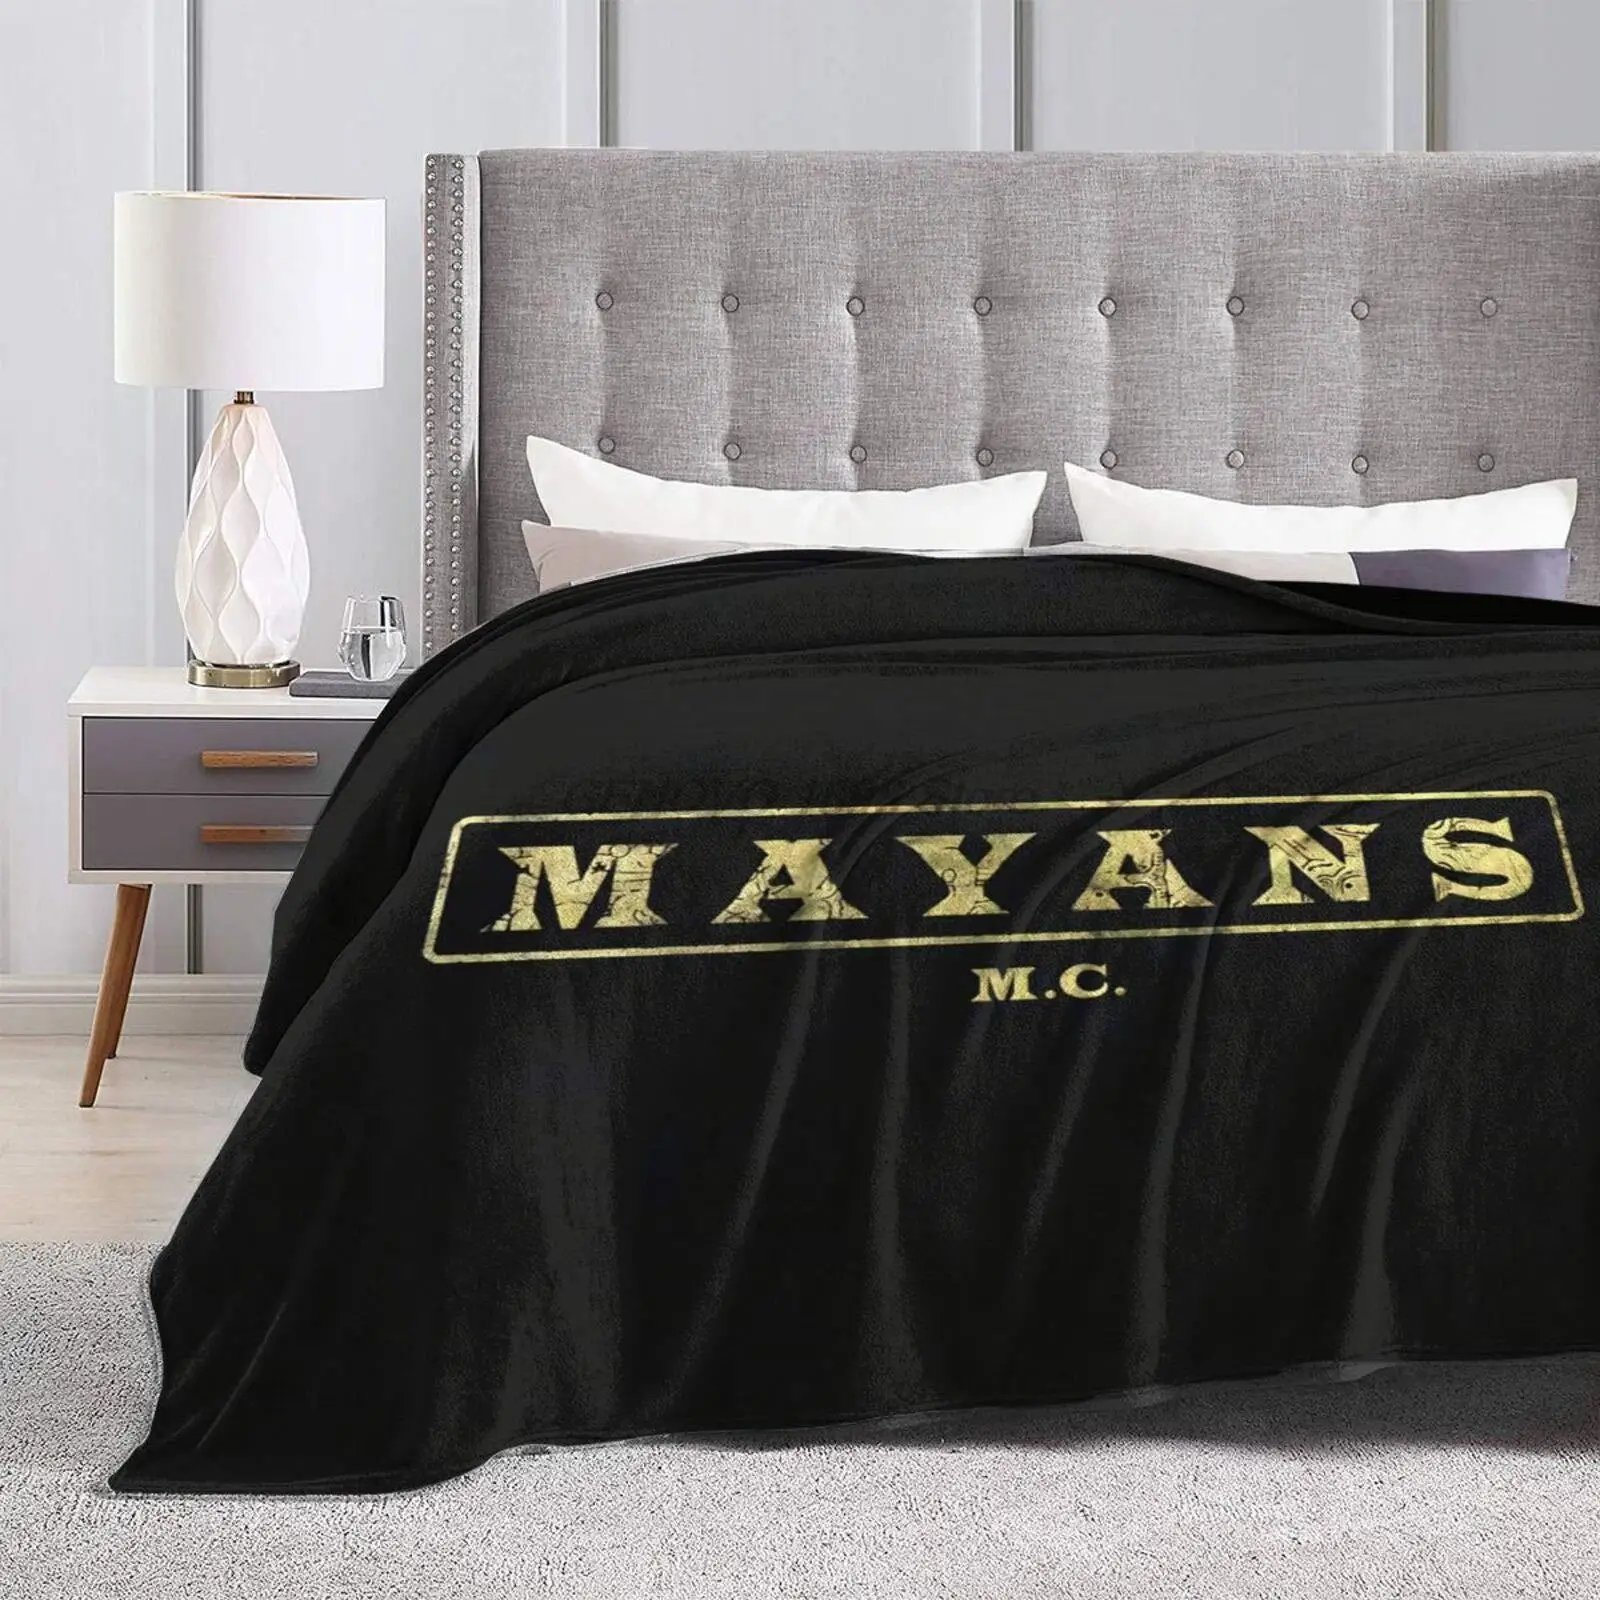 

Mayans M.C Ultra-Soft Throw Blanket Flannel Light Weight Fuzzy Warm Throws for Winter Bedding, Couch, Sofa 80X60